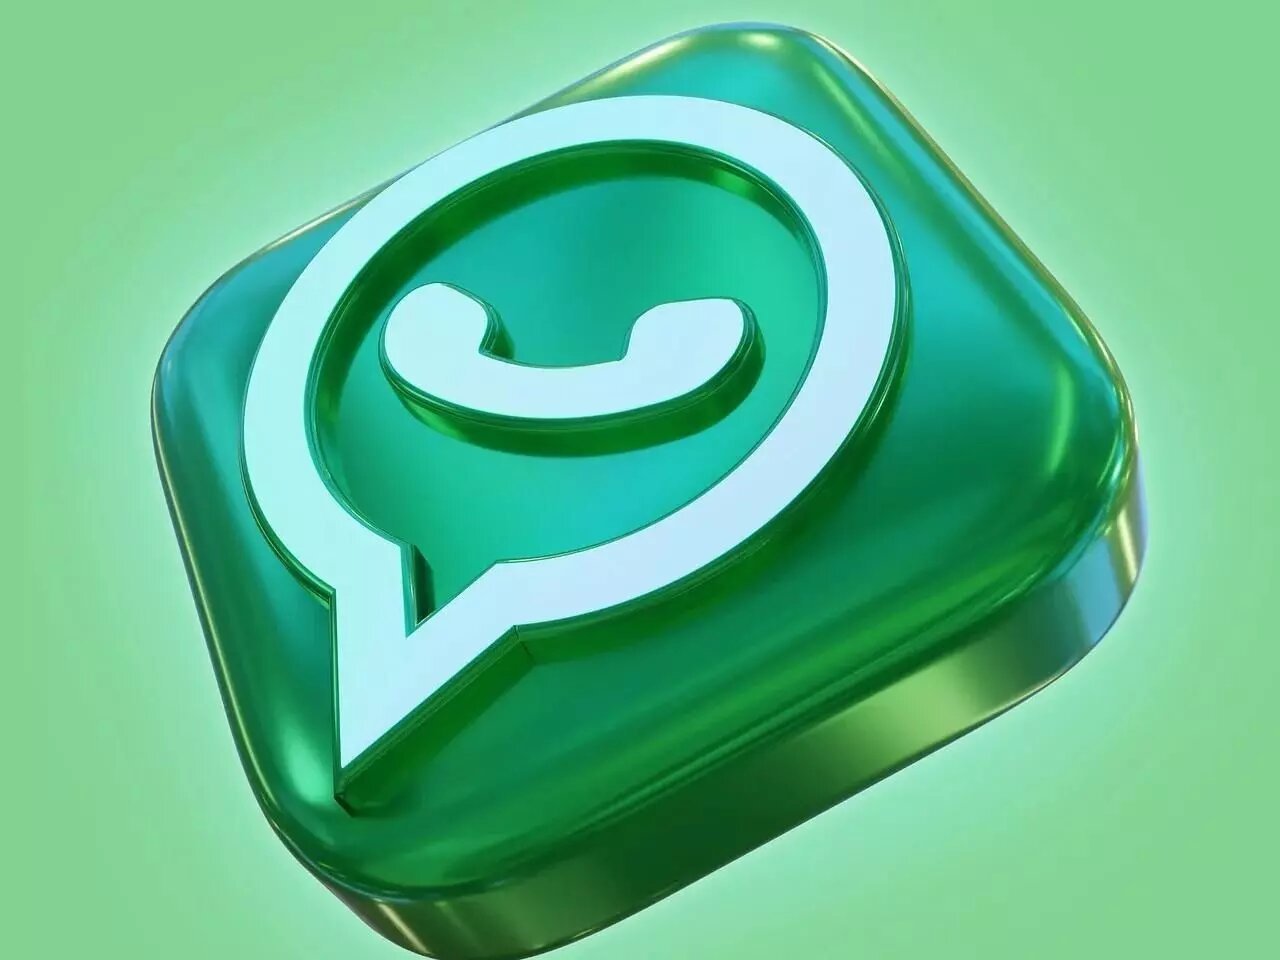 WhatsApp started testing In-App Support Chat on iOS, Android Beta Versions